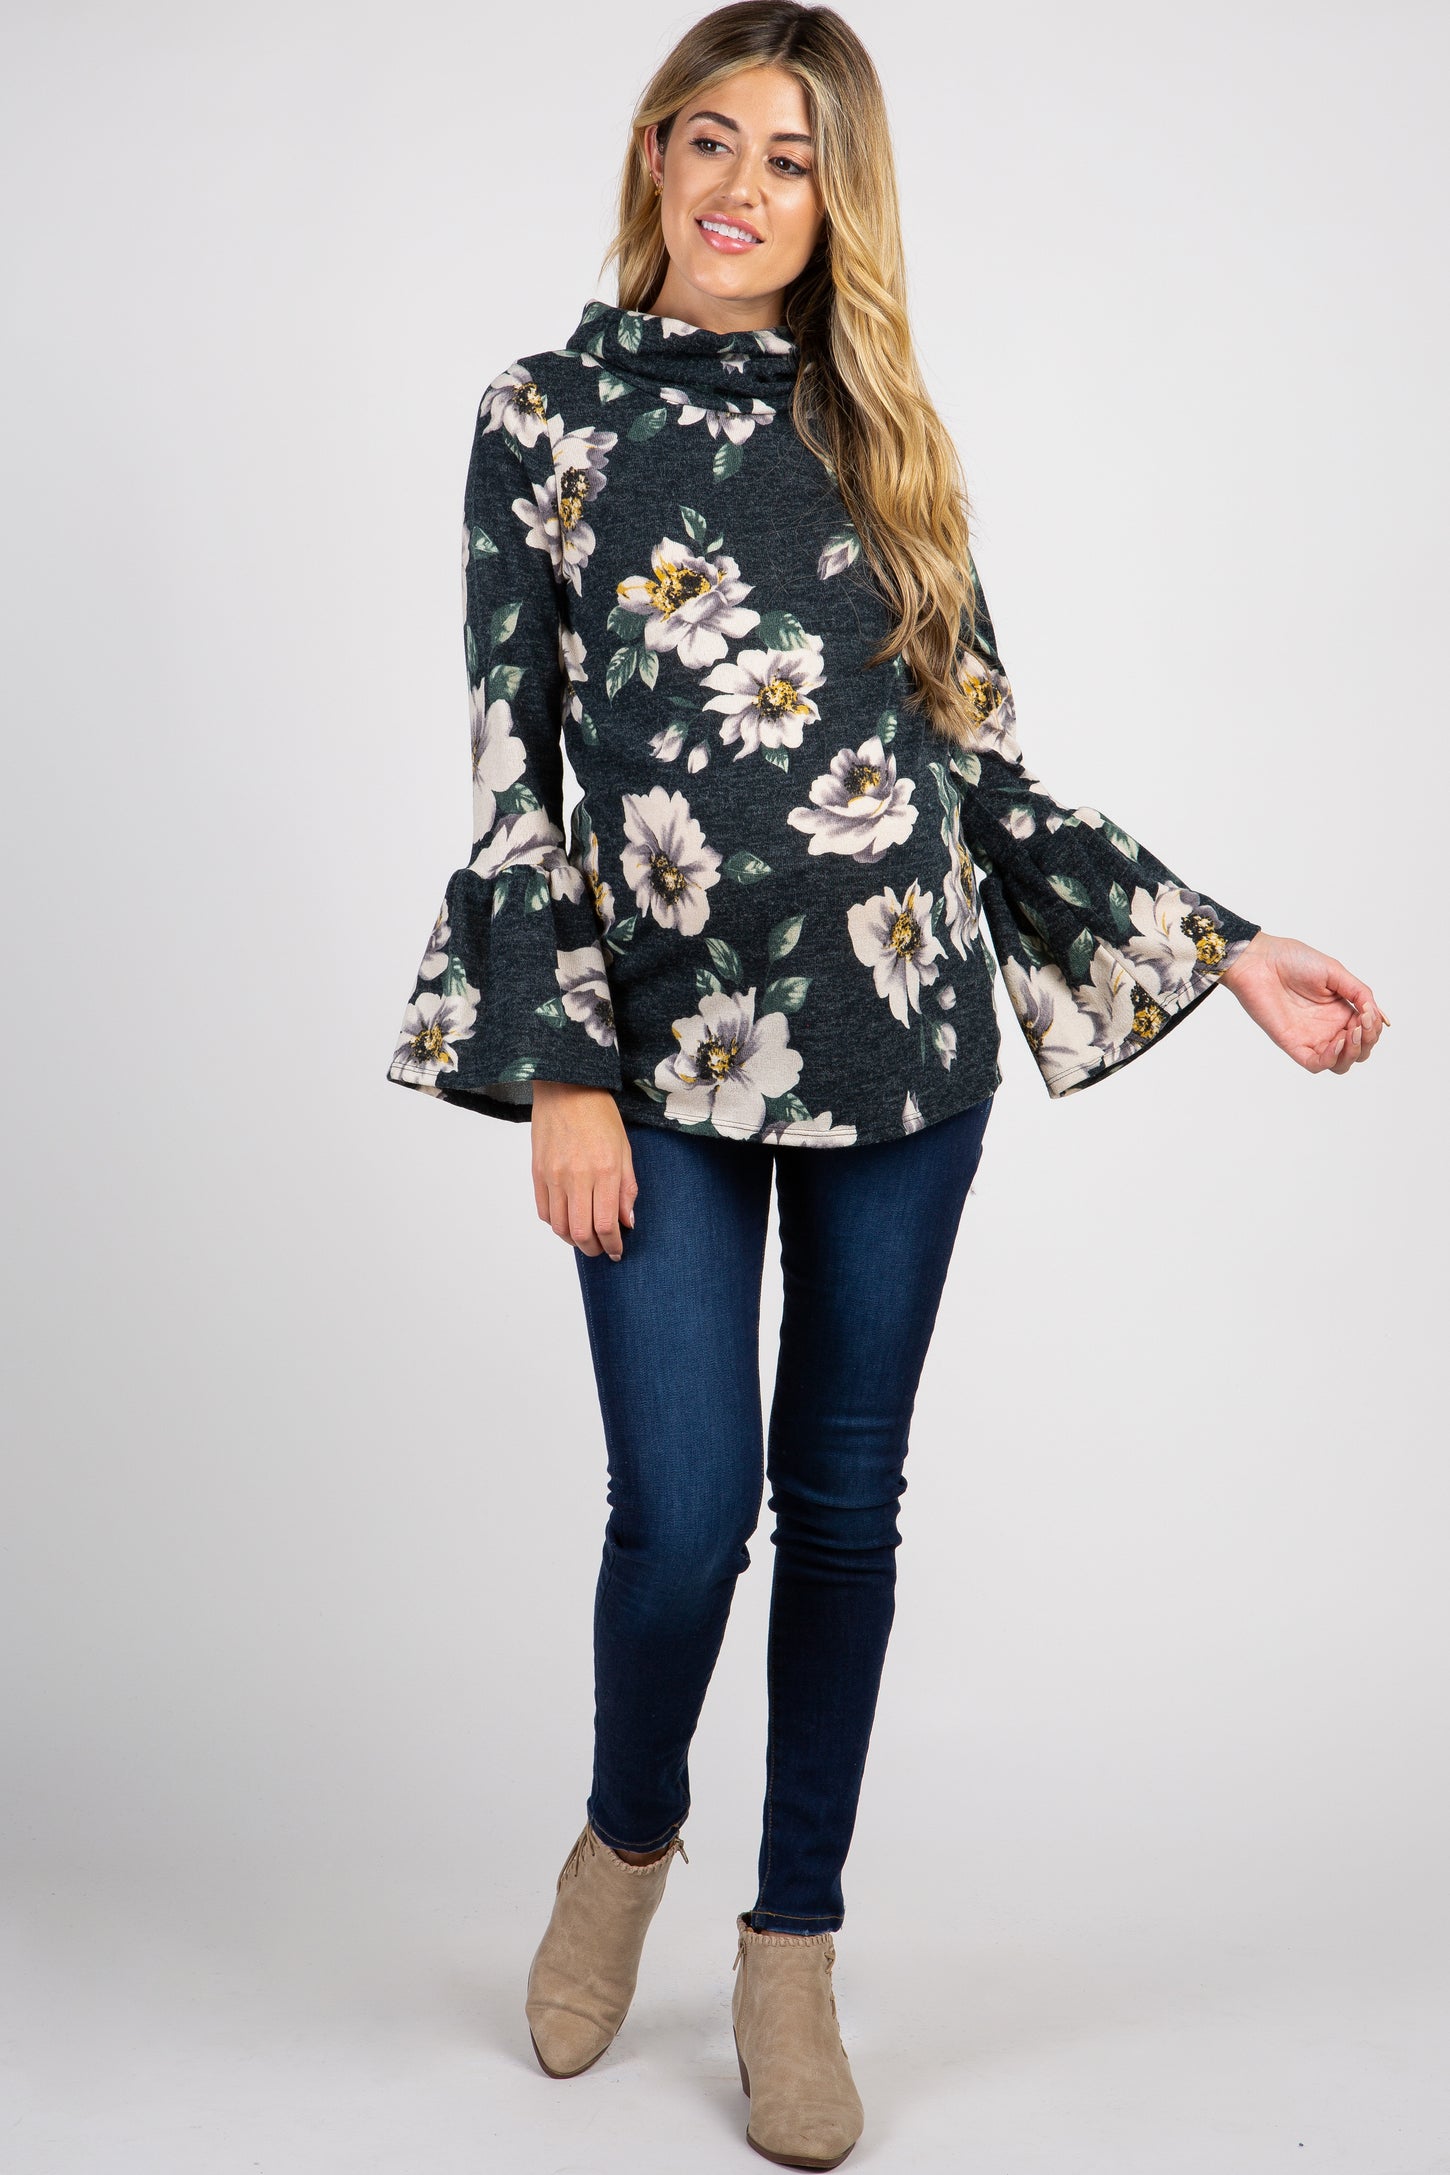 Green Floral Cowl Neck Ruffle Sleeve Maternity Top